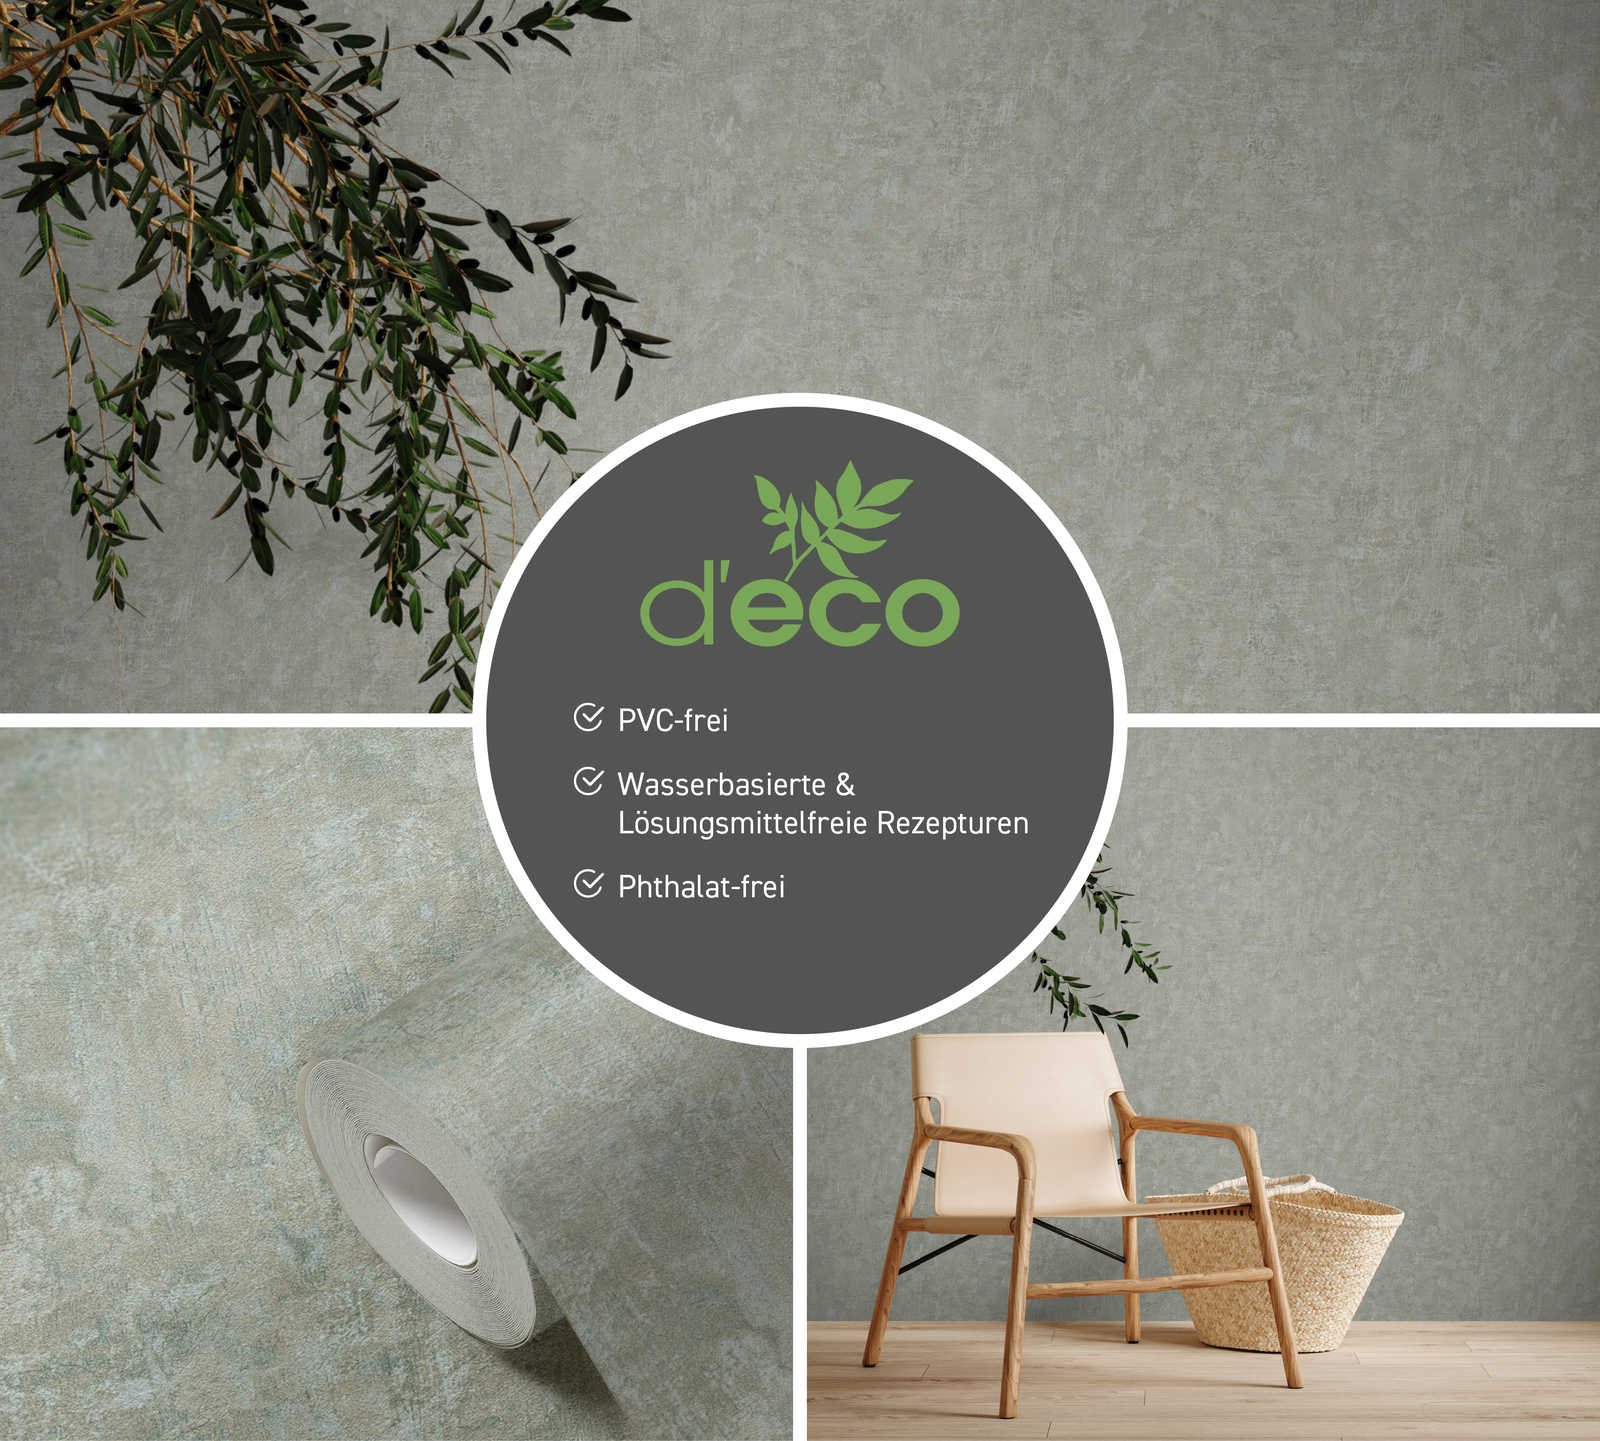             PVC-free non-woven wallpaper with textured look - green, blue
        